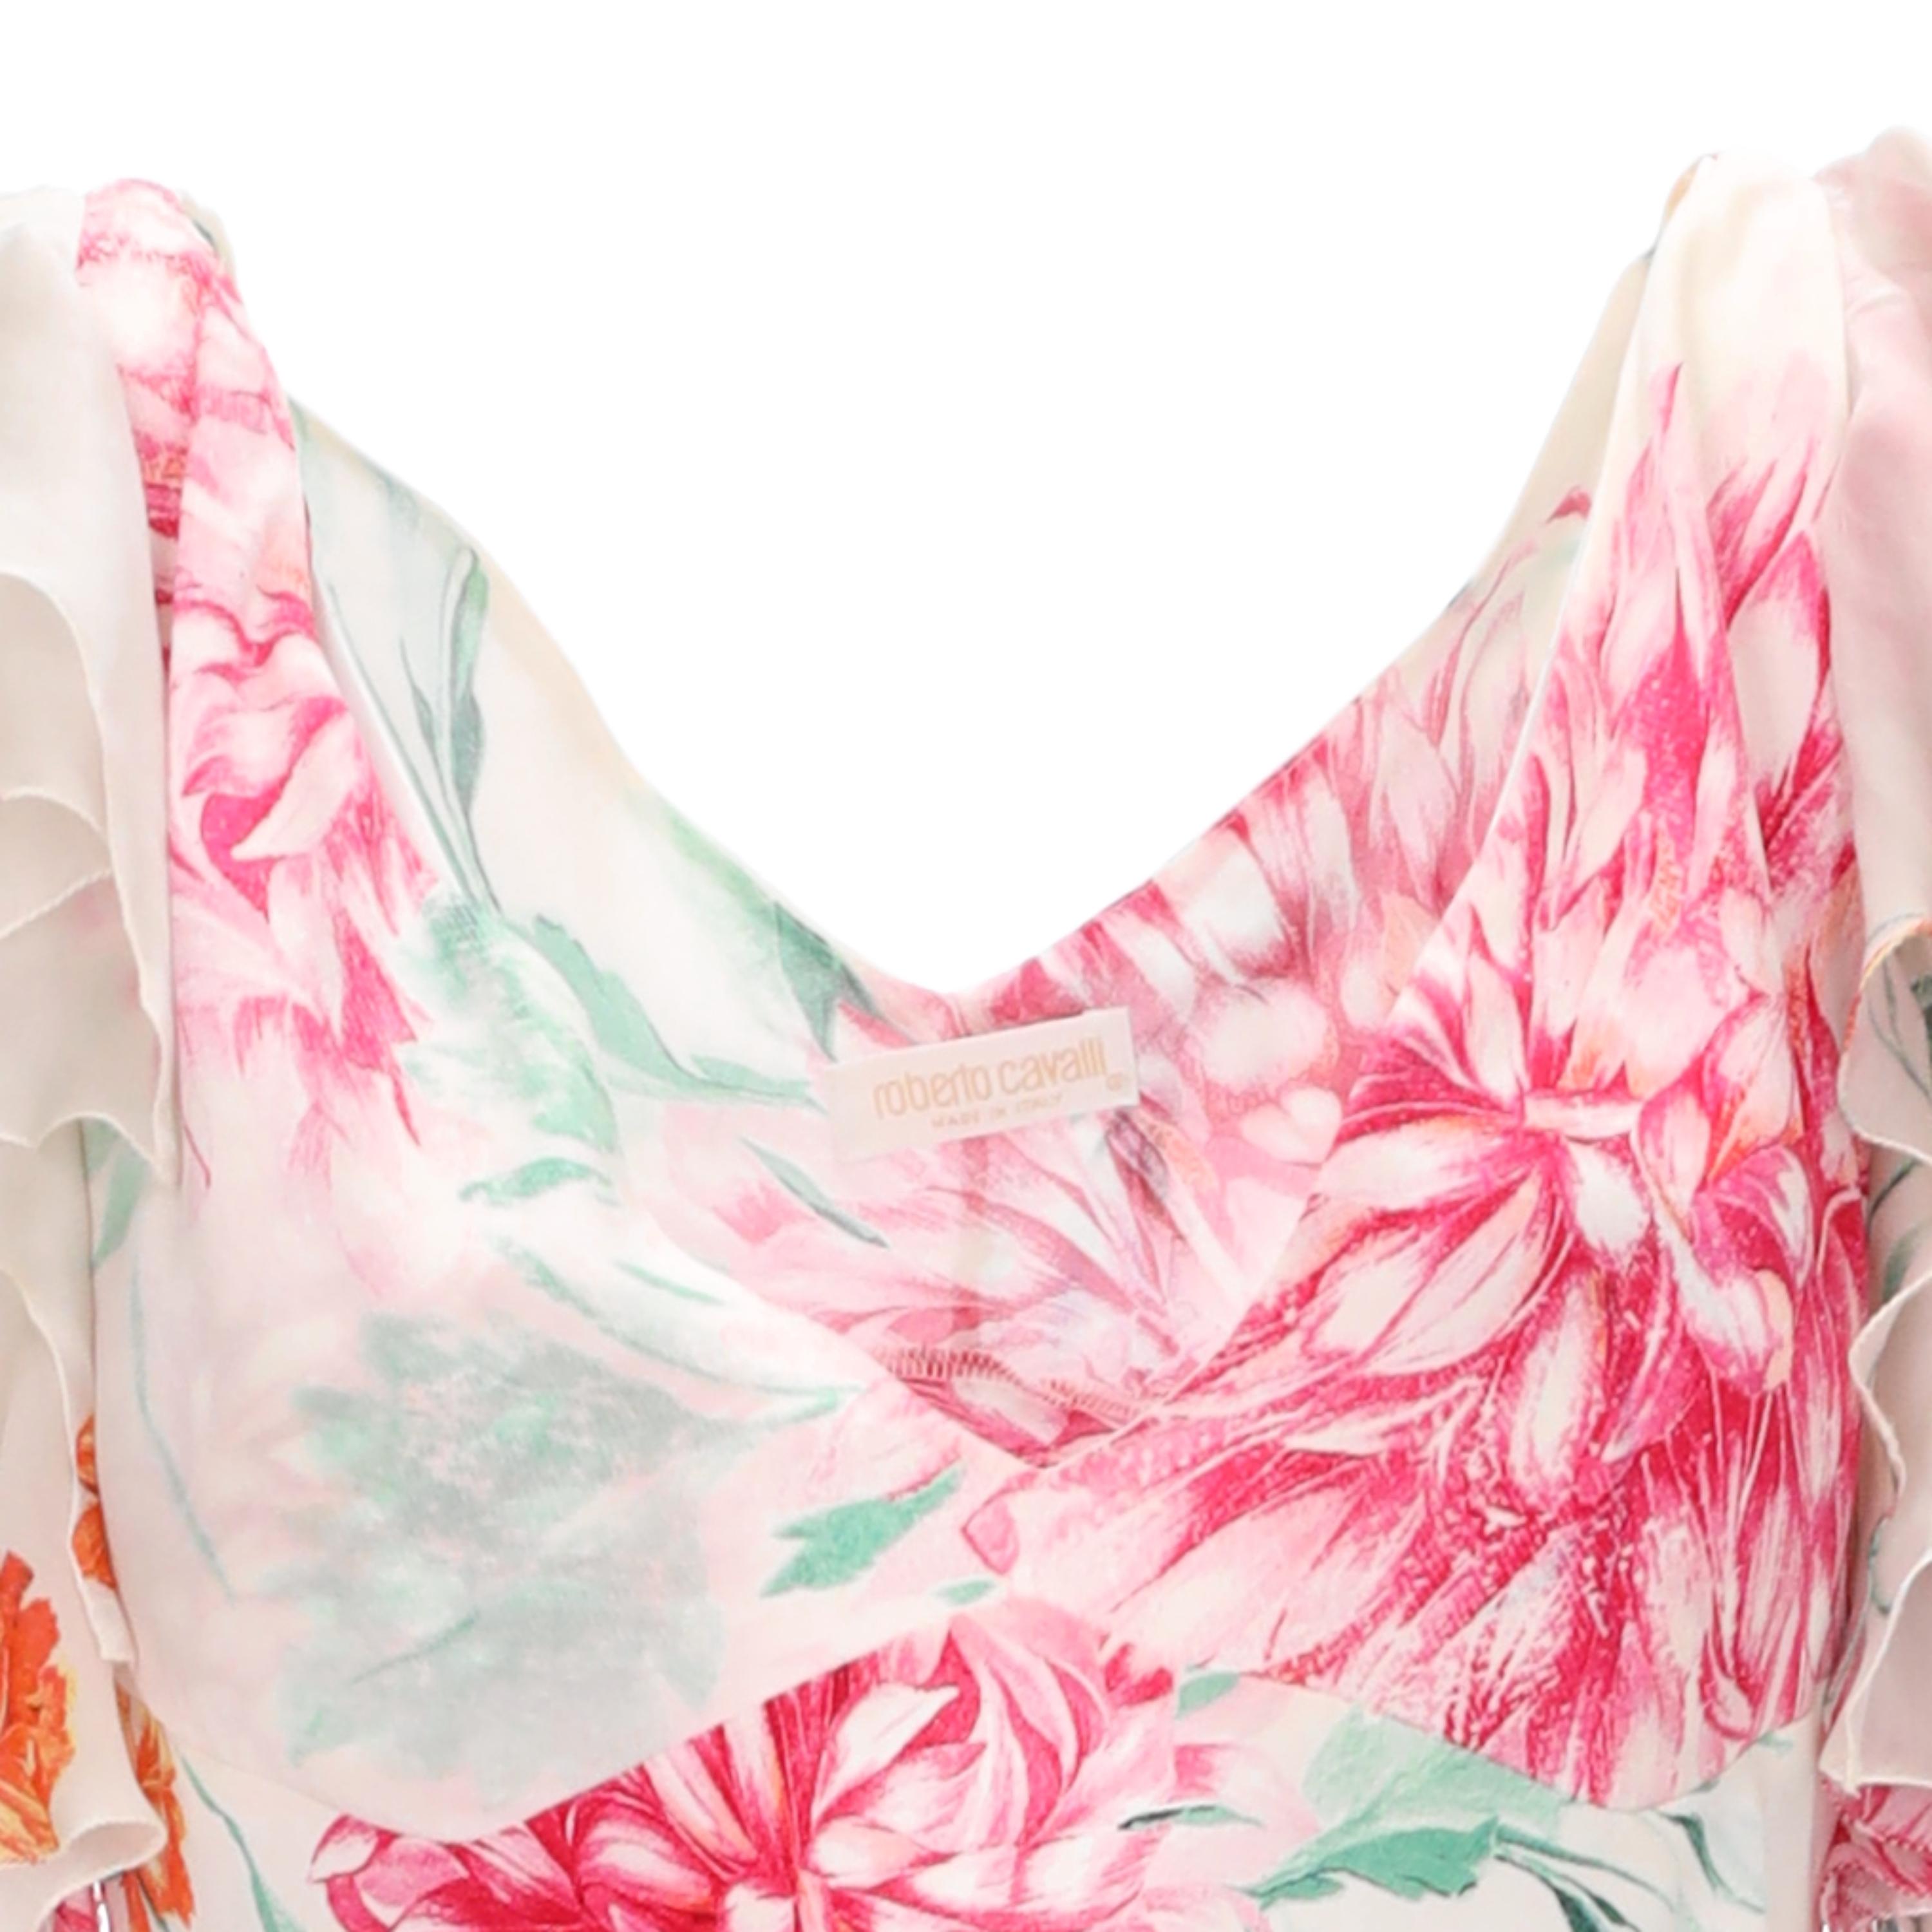 This Roberto Cavalli dress is crafted from luxurious light silk and features a vibrant floral pattern with pink and orange flowers complemented by hints of green leaves. The frilled sleeves and plunging V-neck accentuated by a long, graceful hemline